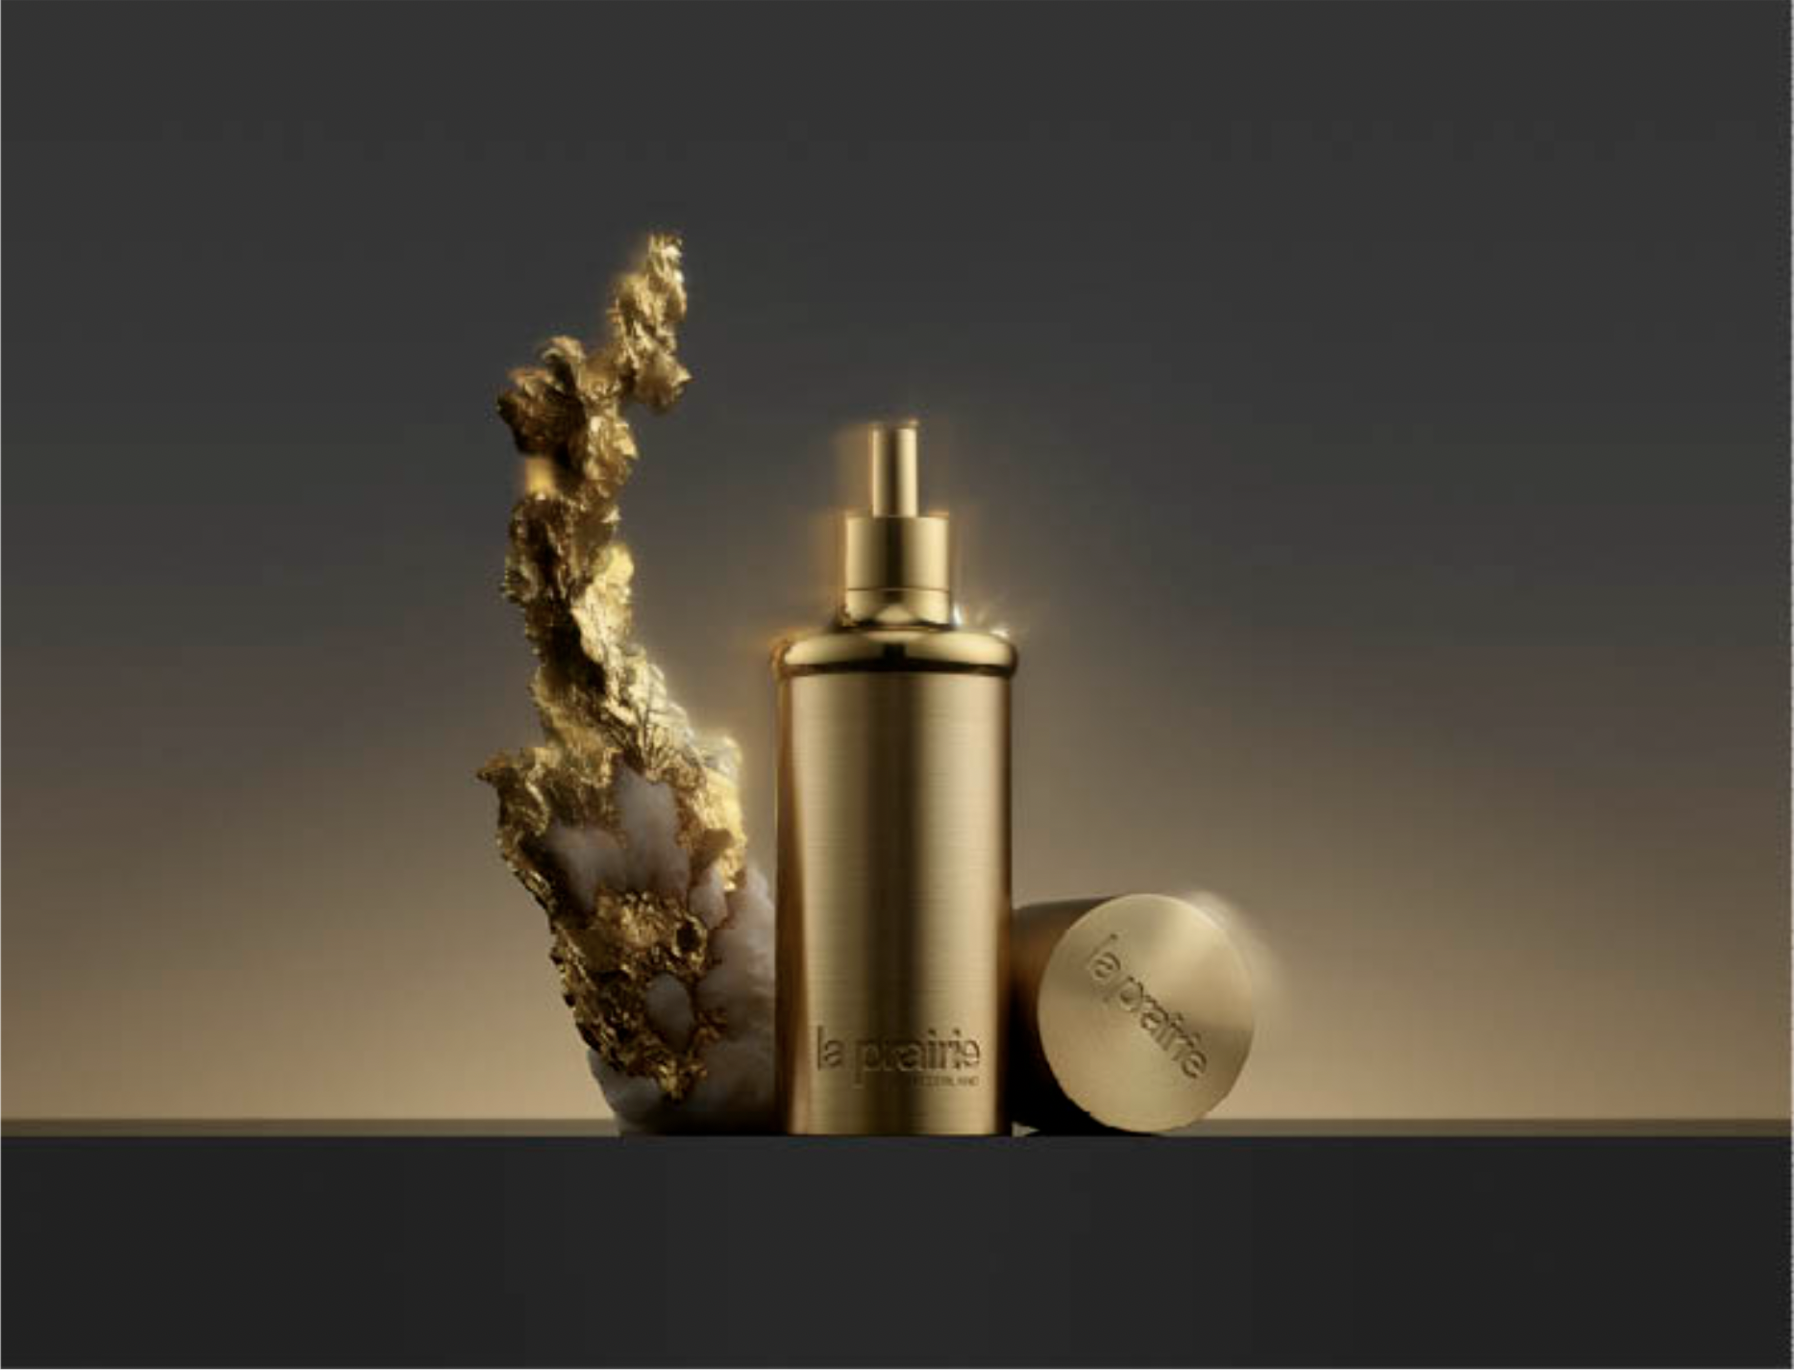 La Prairie Pure Gold Radiance Concentrate